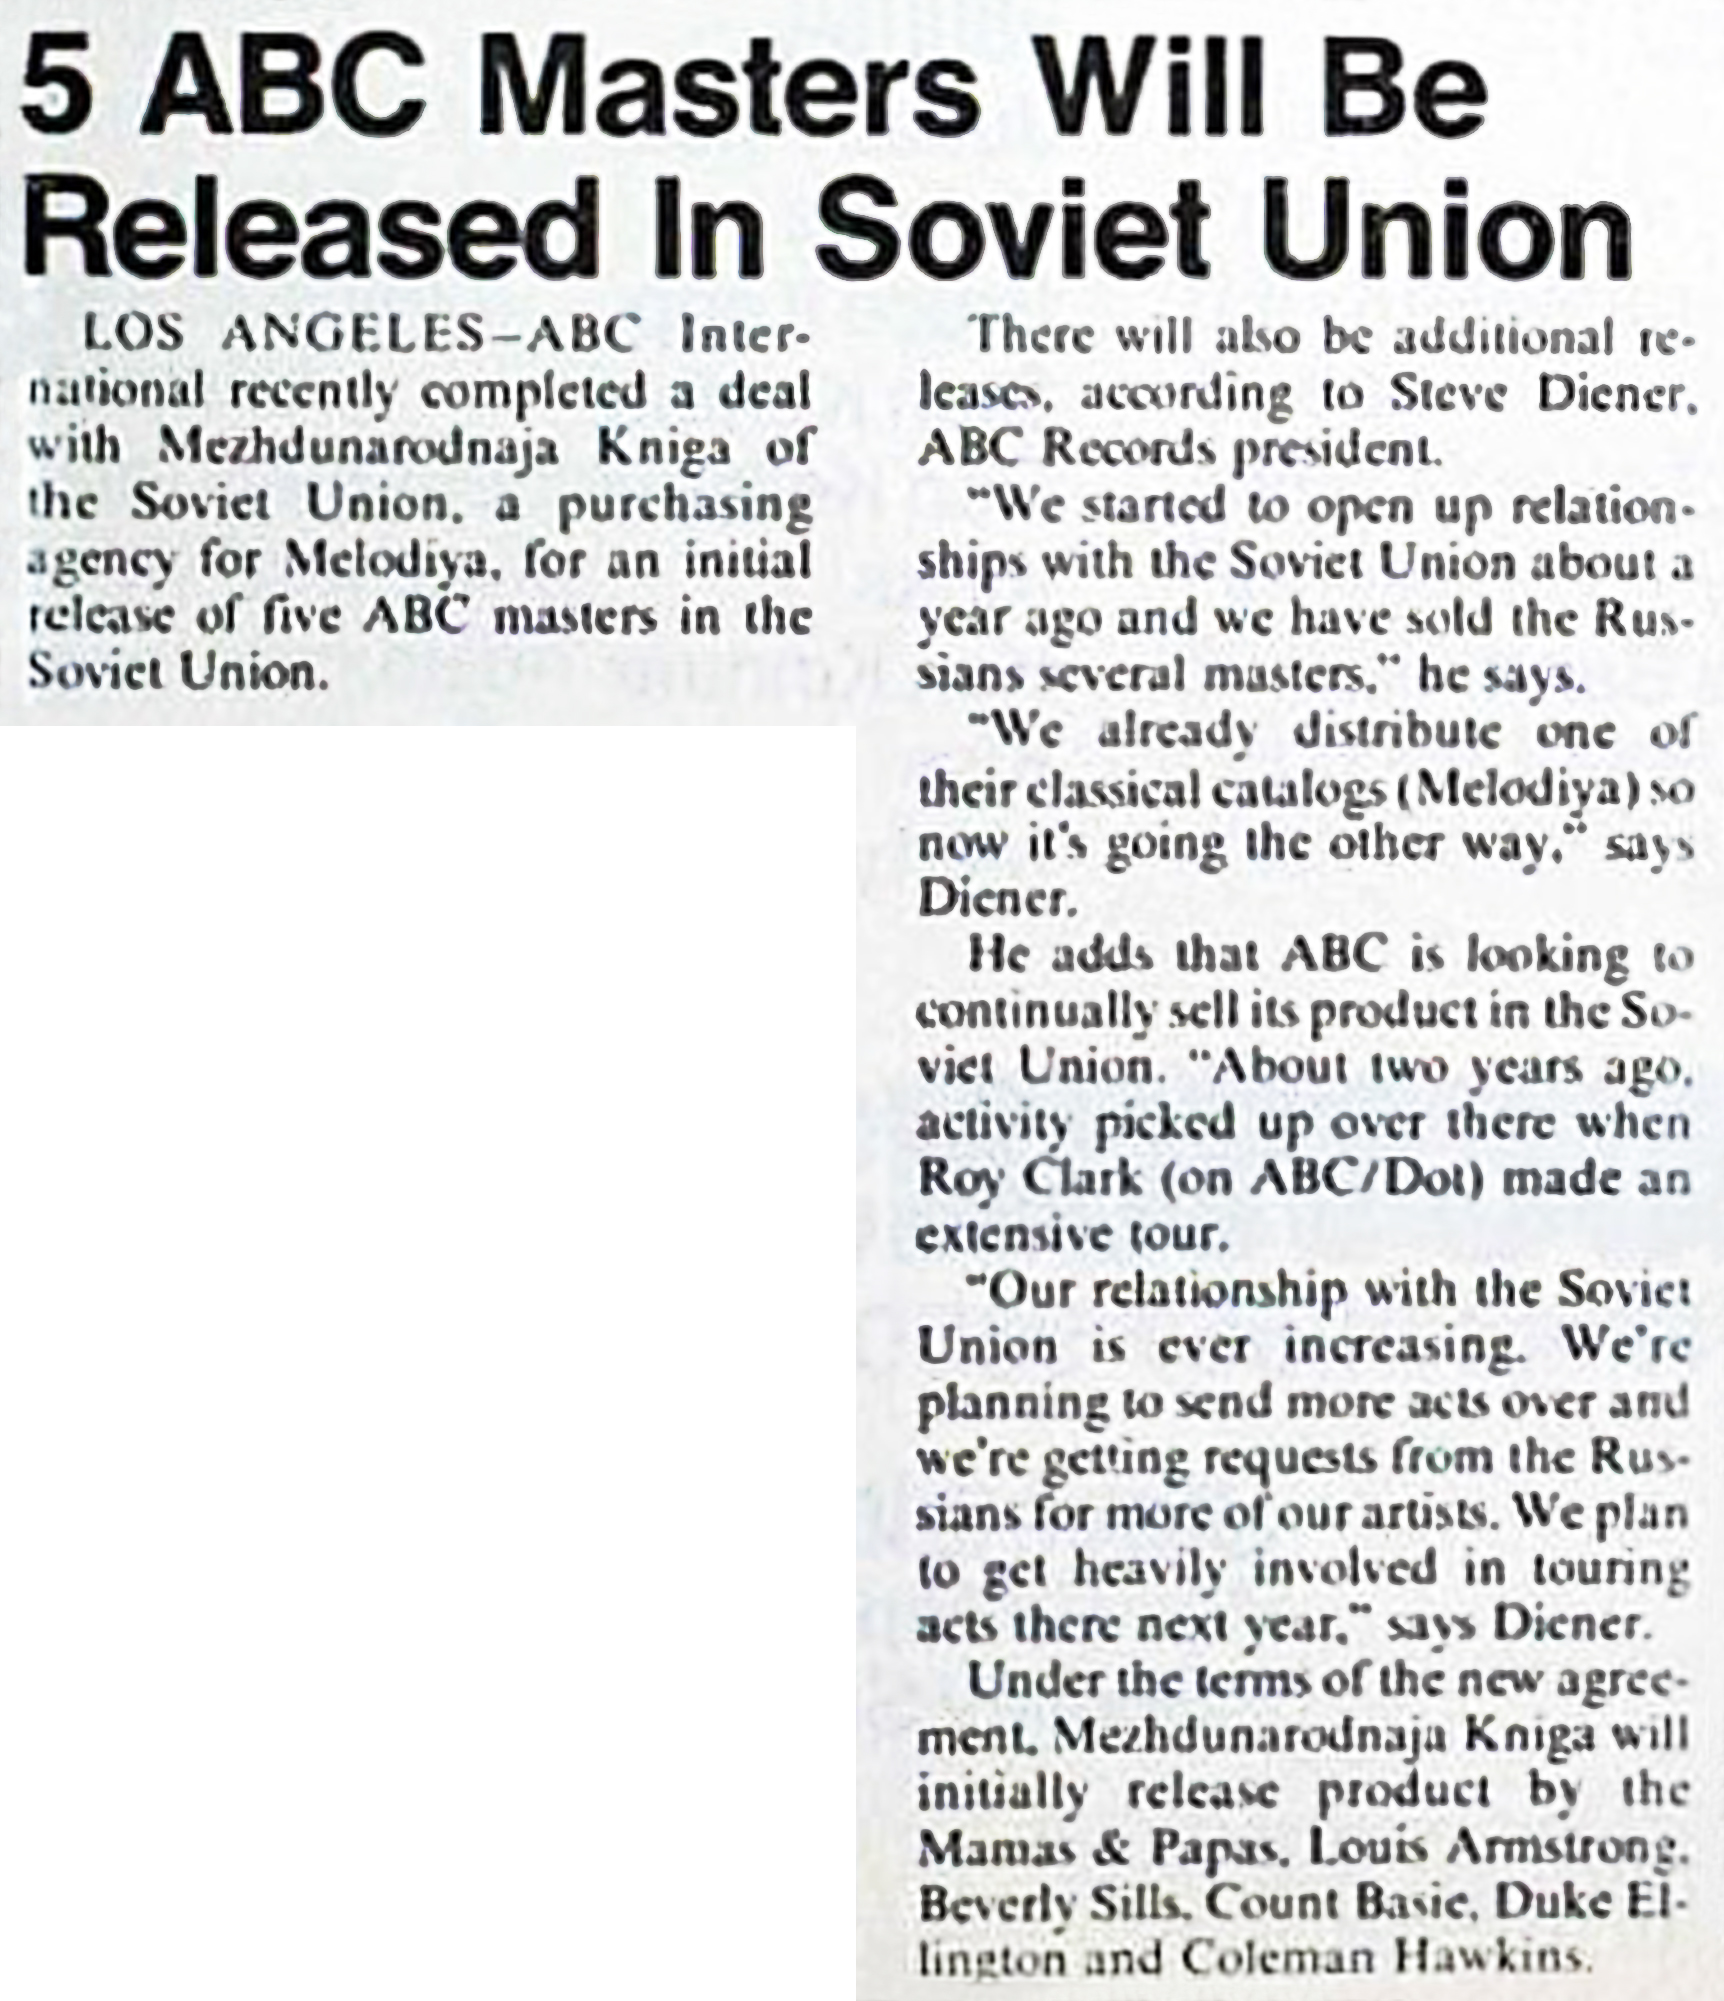 5 ABC Masters Will Be Released In Soviet Union